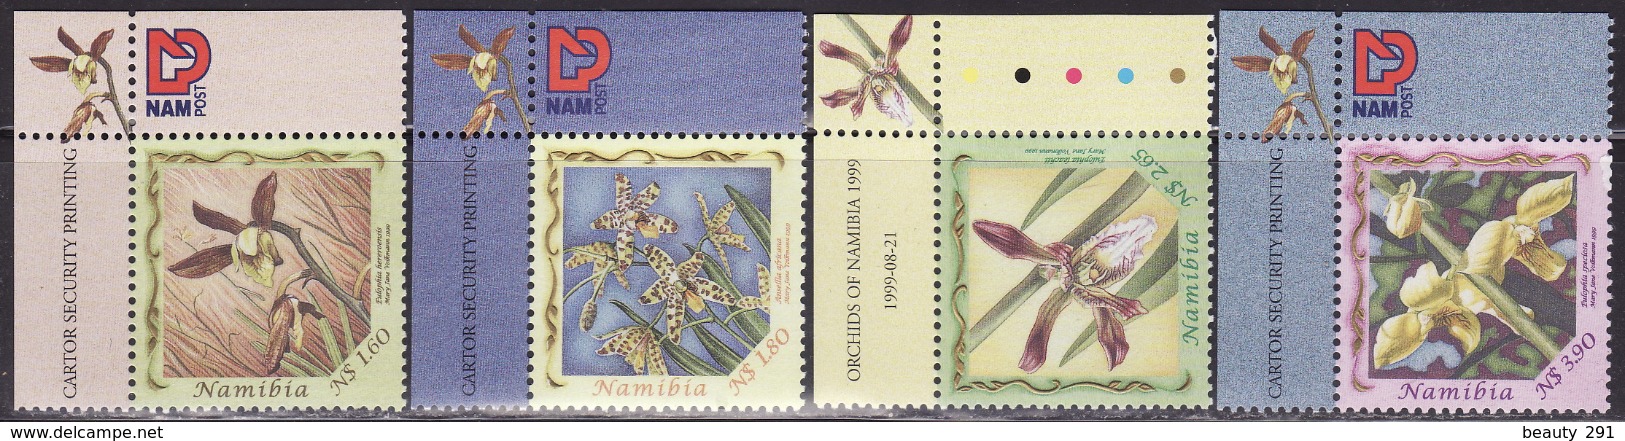 Namibia 1999 Orchids Set Of 4, Mi 995-998 MNH** - Orchideen